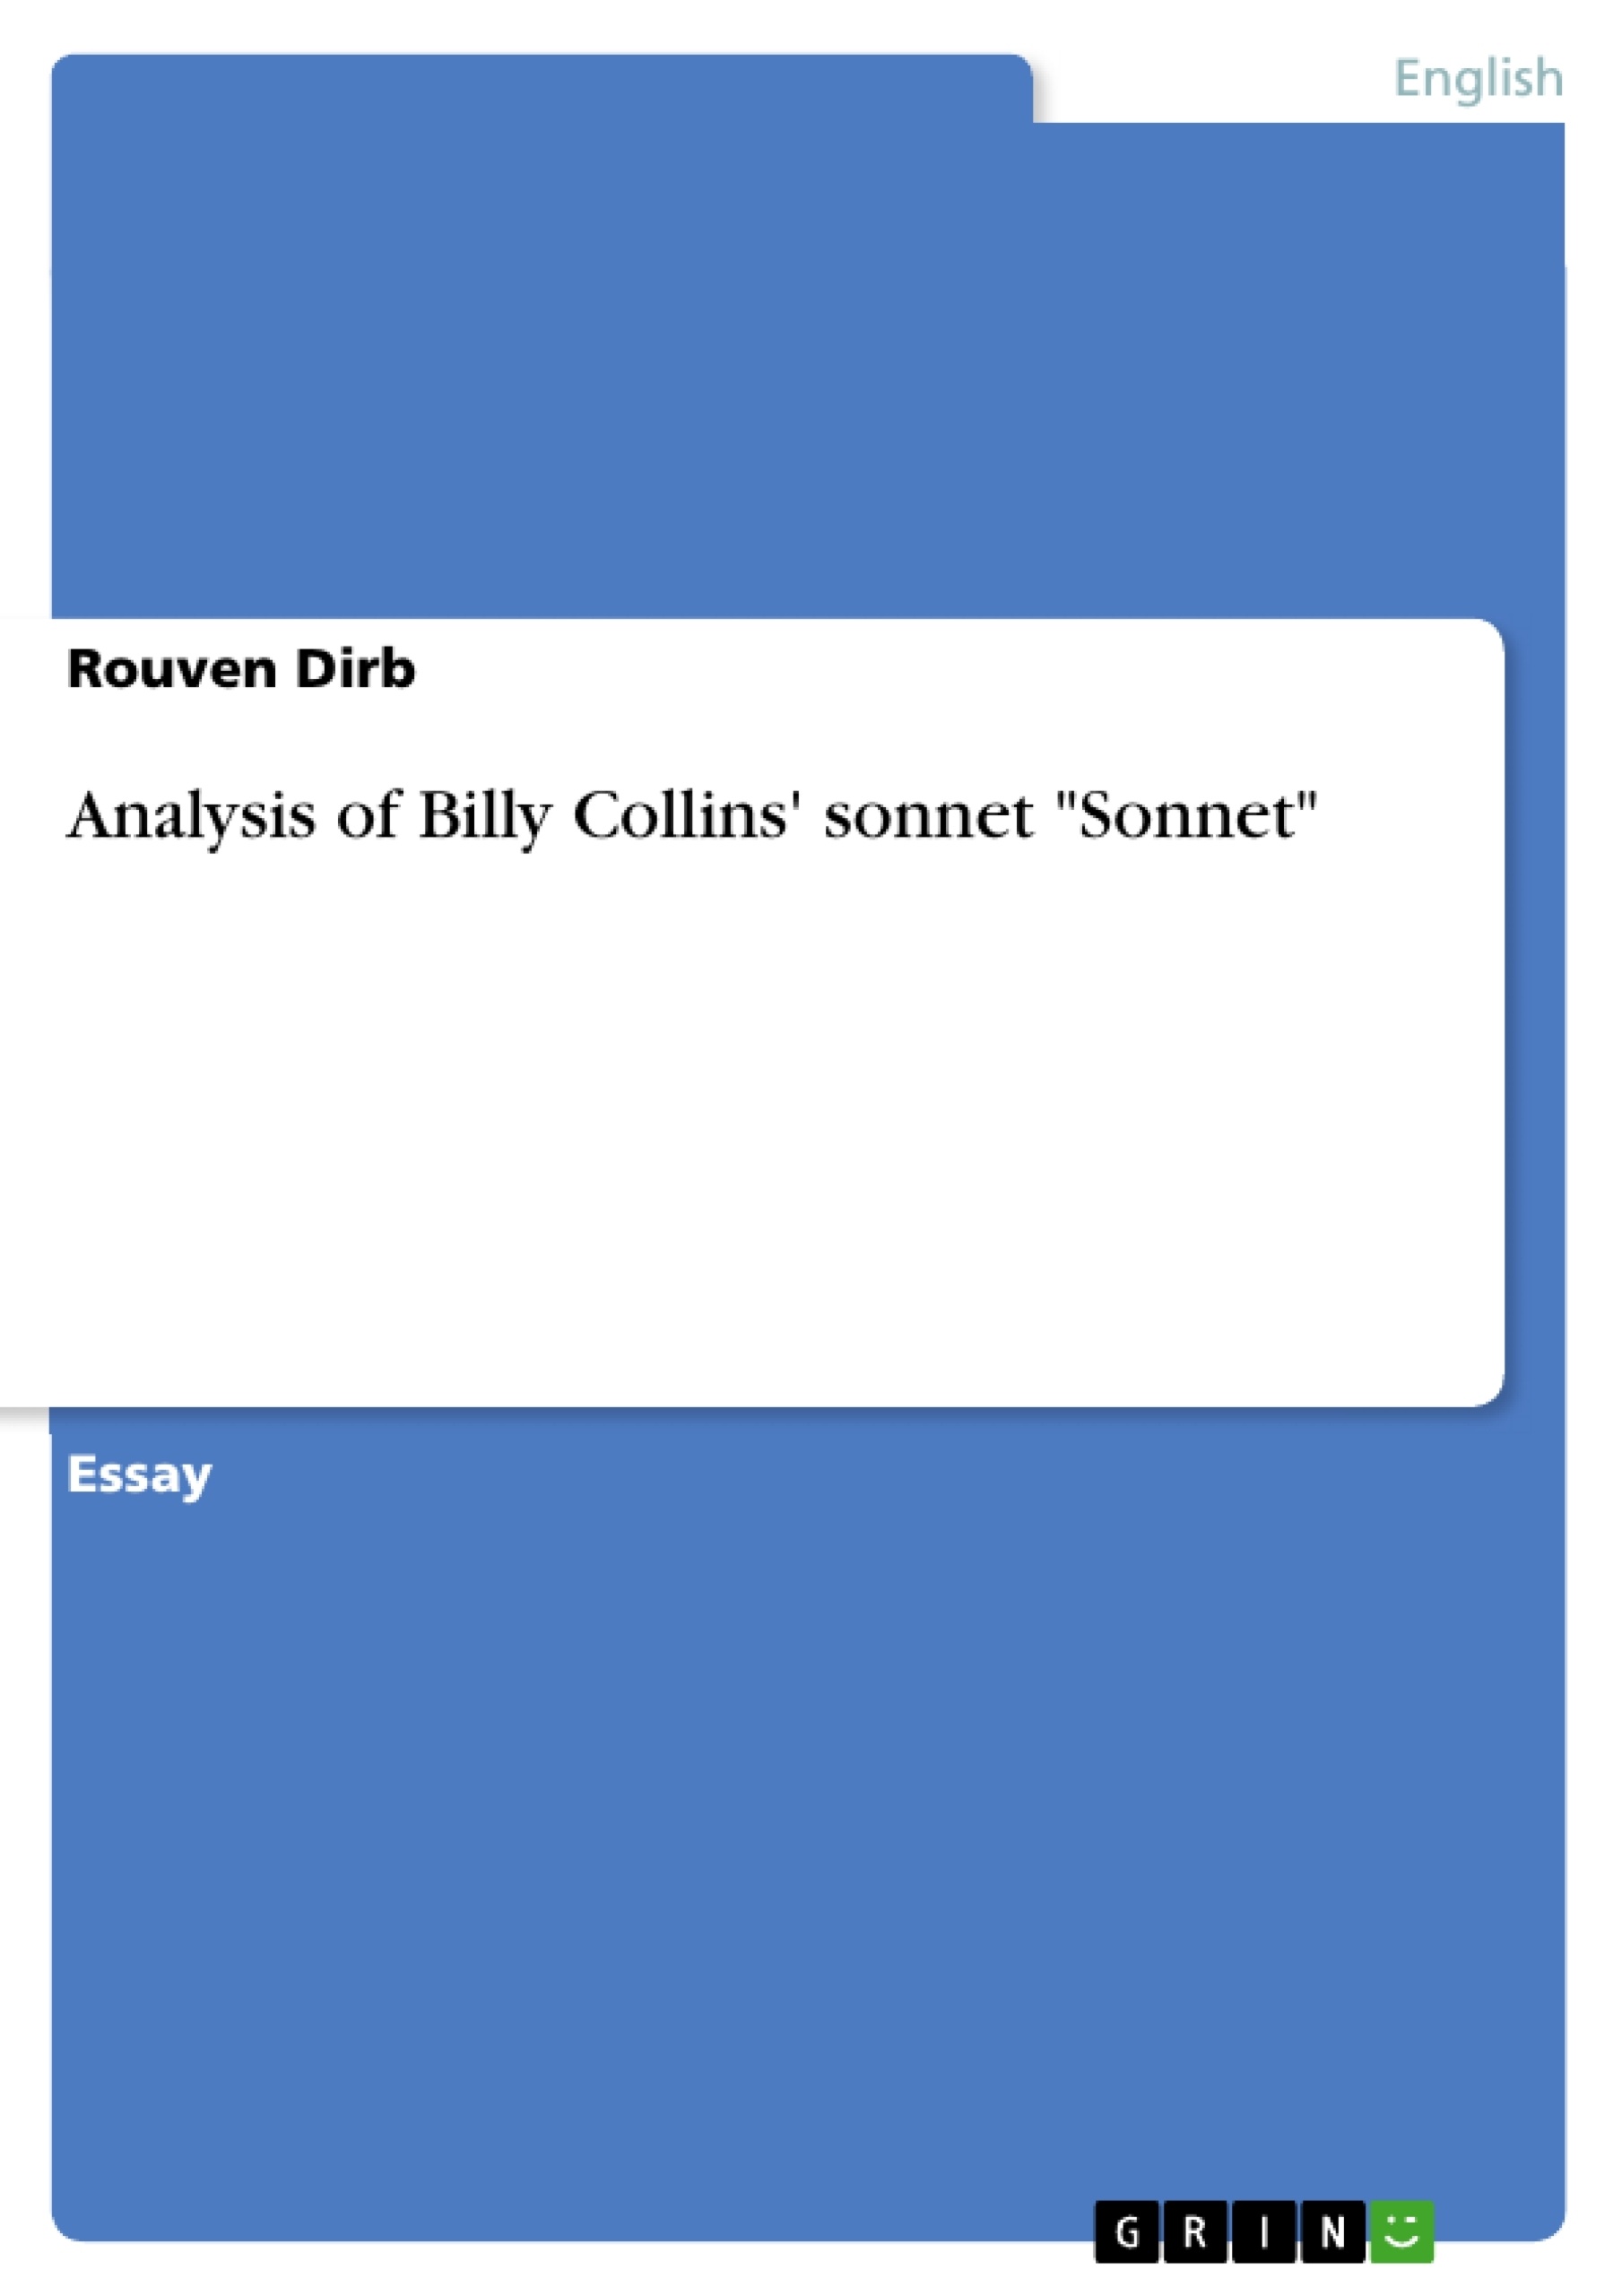 Titre: Analysis of Billy Collins' sonnet "Sonnet"